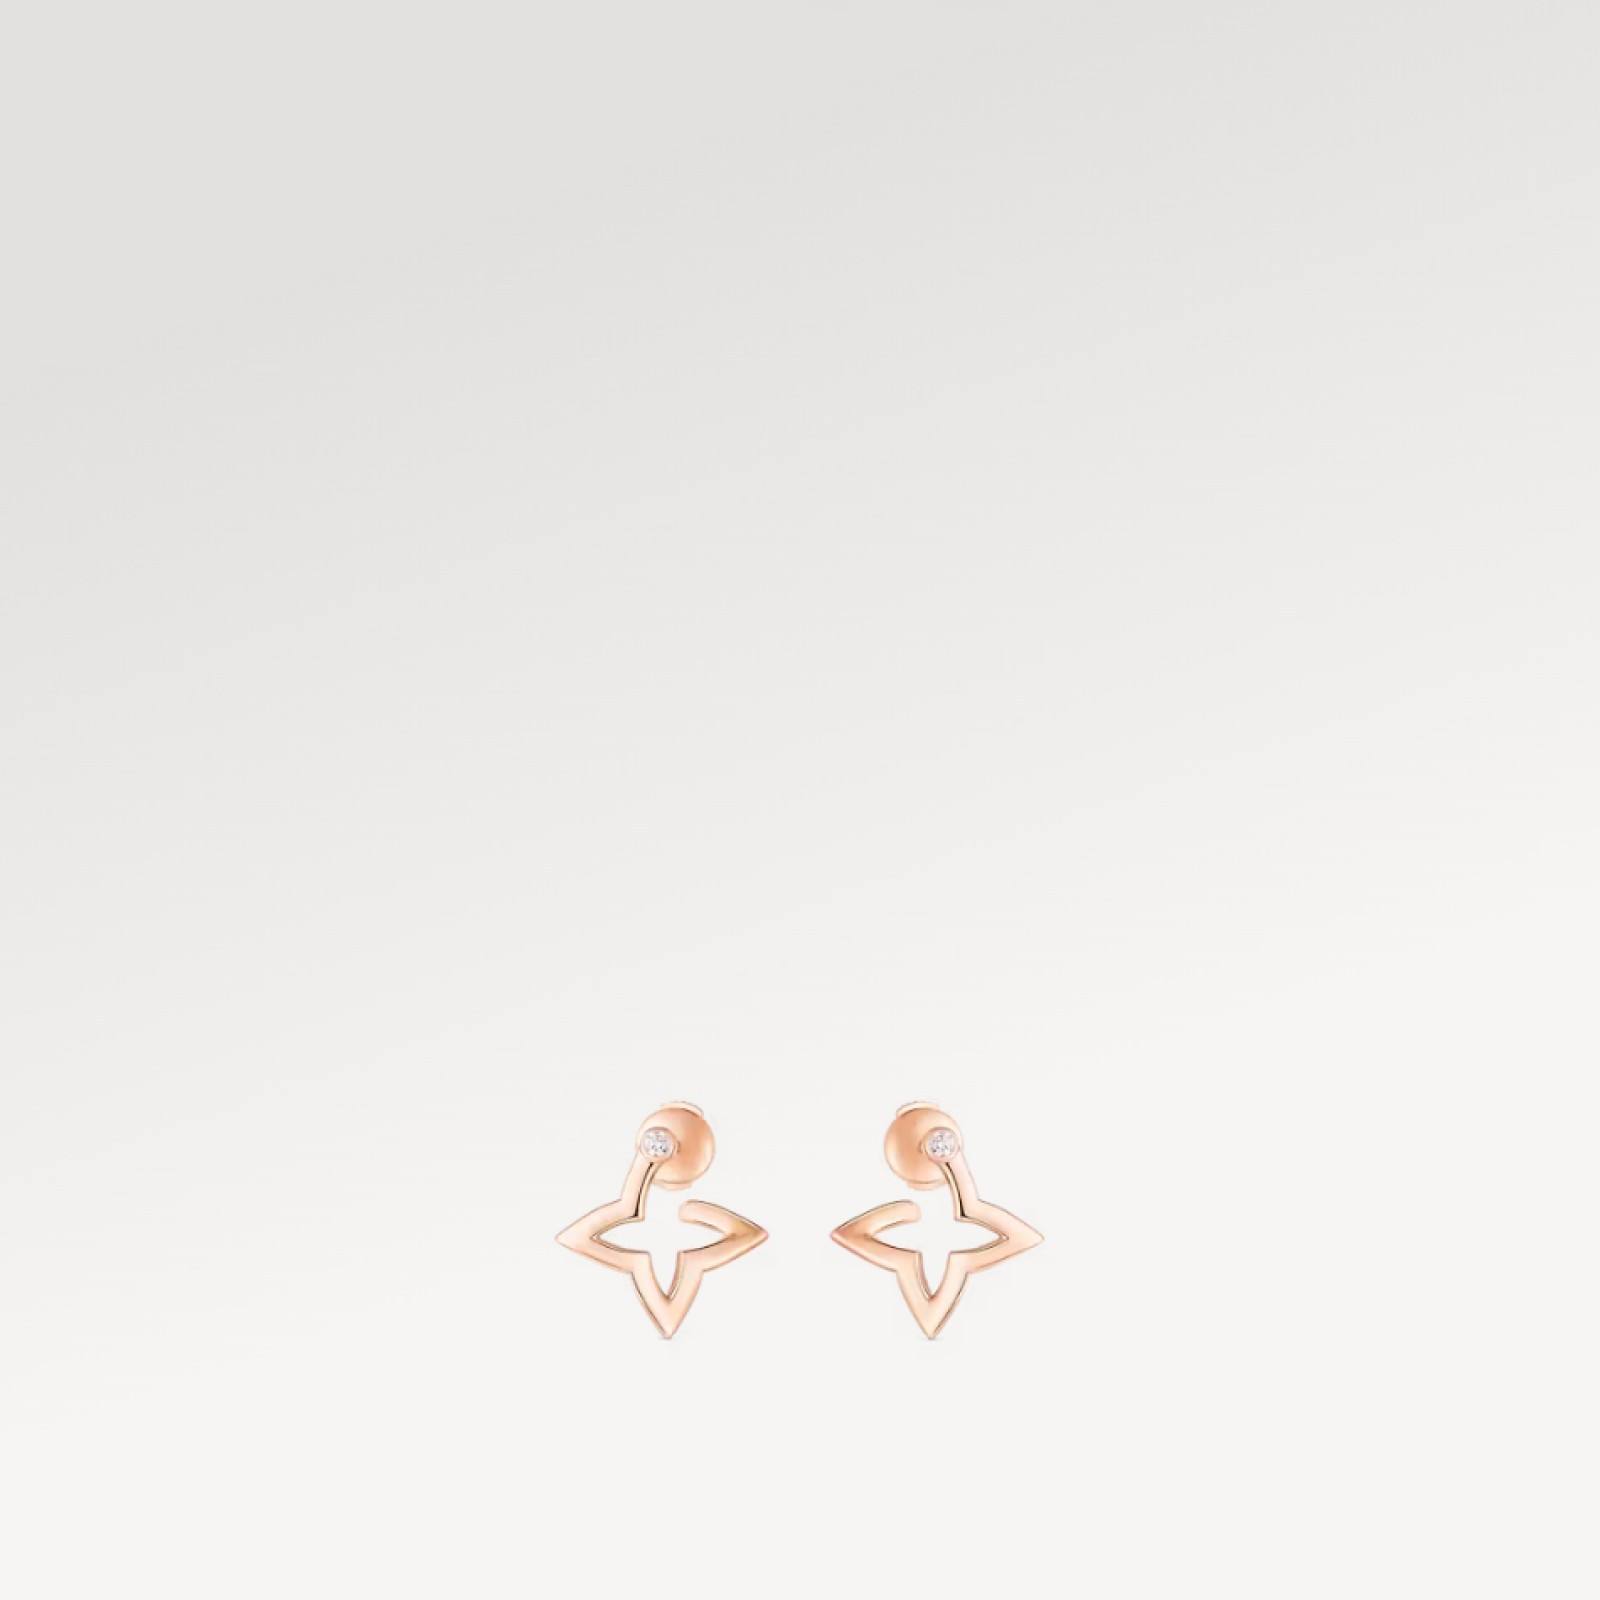 Louis Vuitton Blossom Mini Hoops, Pink Gold and Diamonds